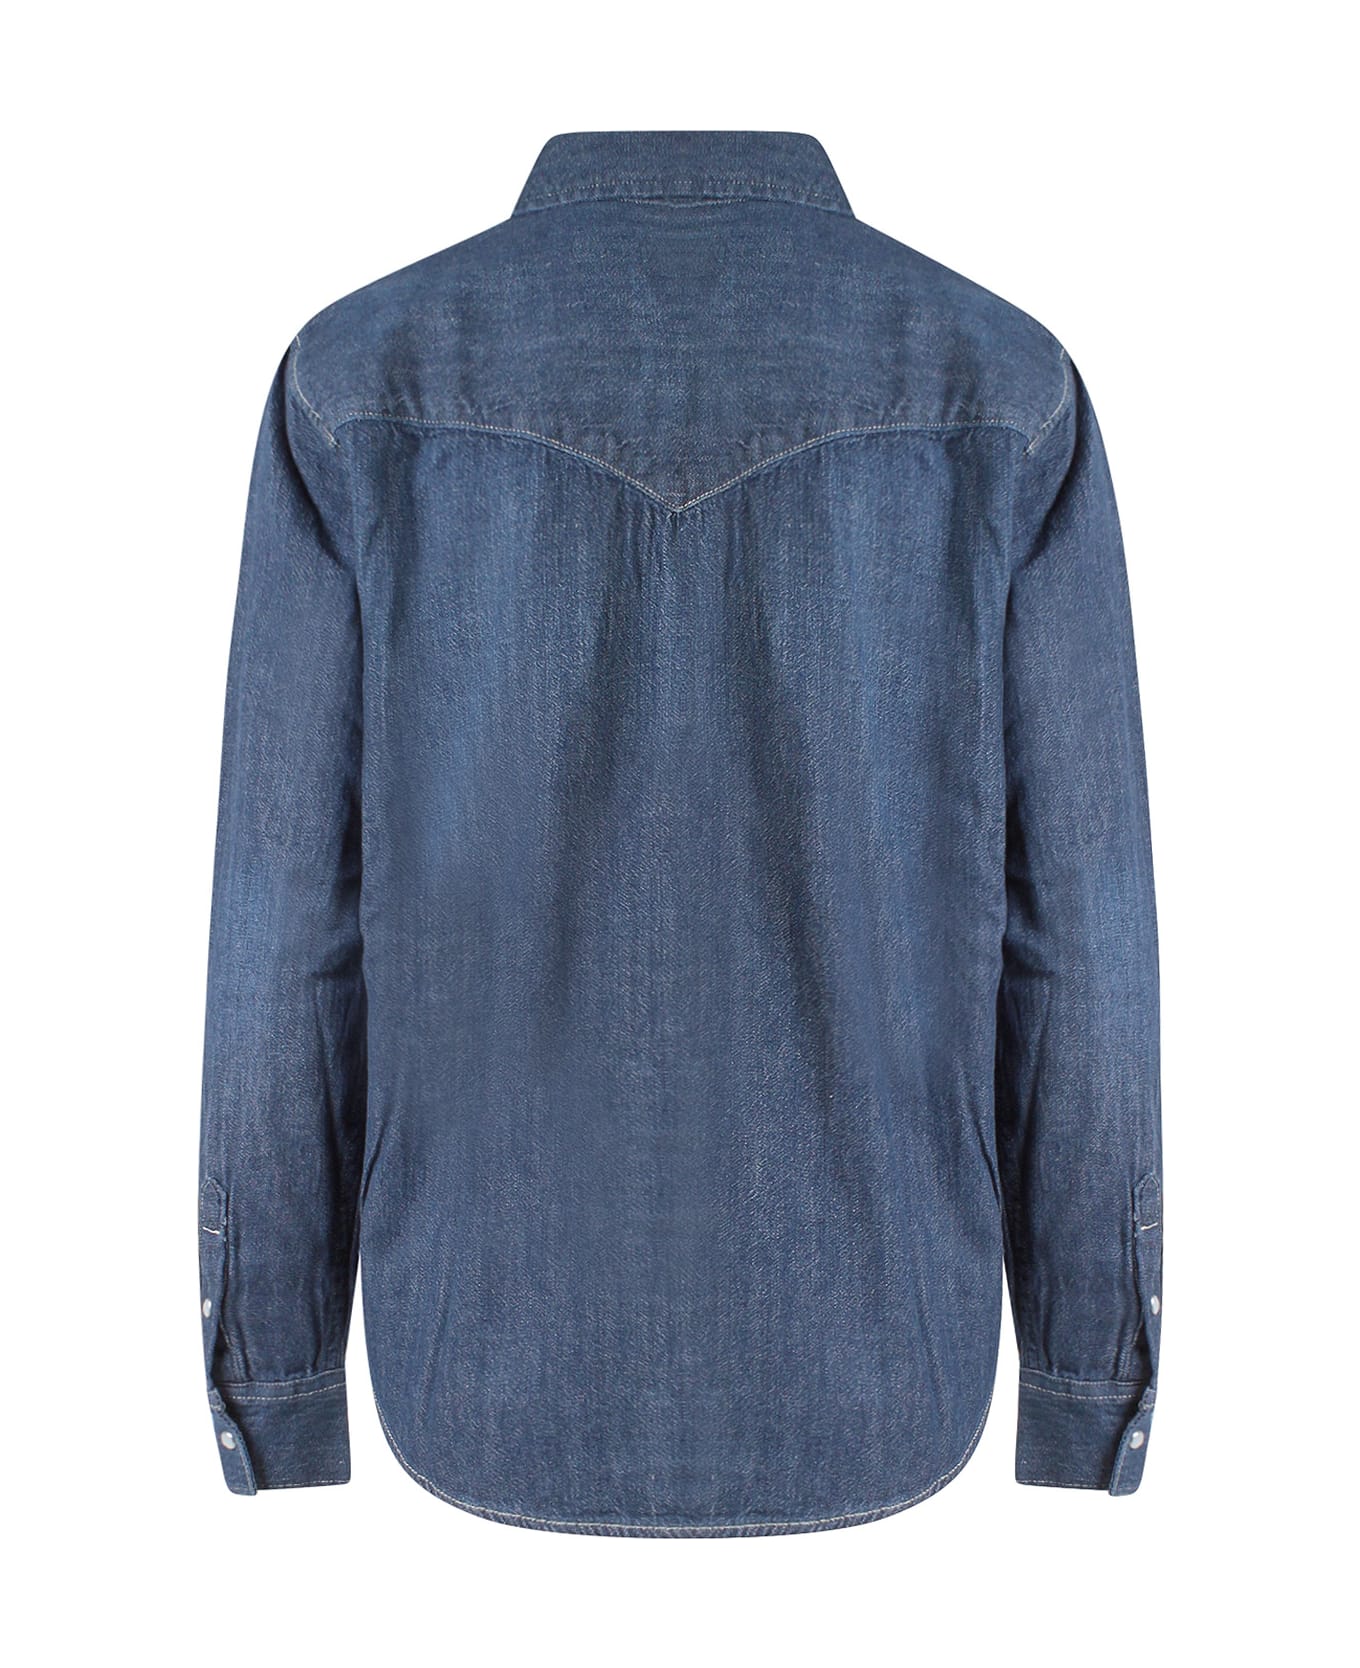 Levi's The Western Shirt - Blue シャツ